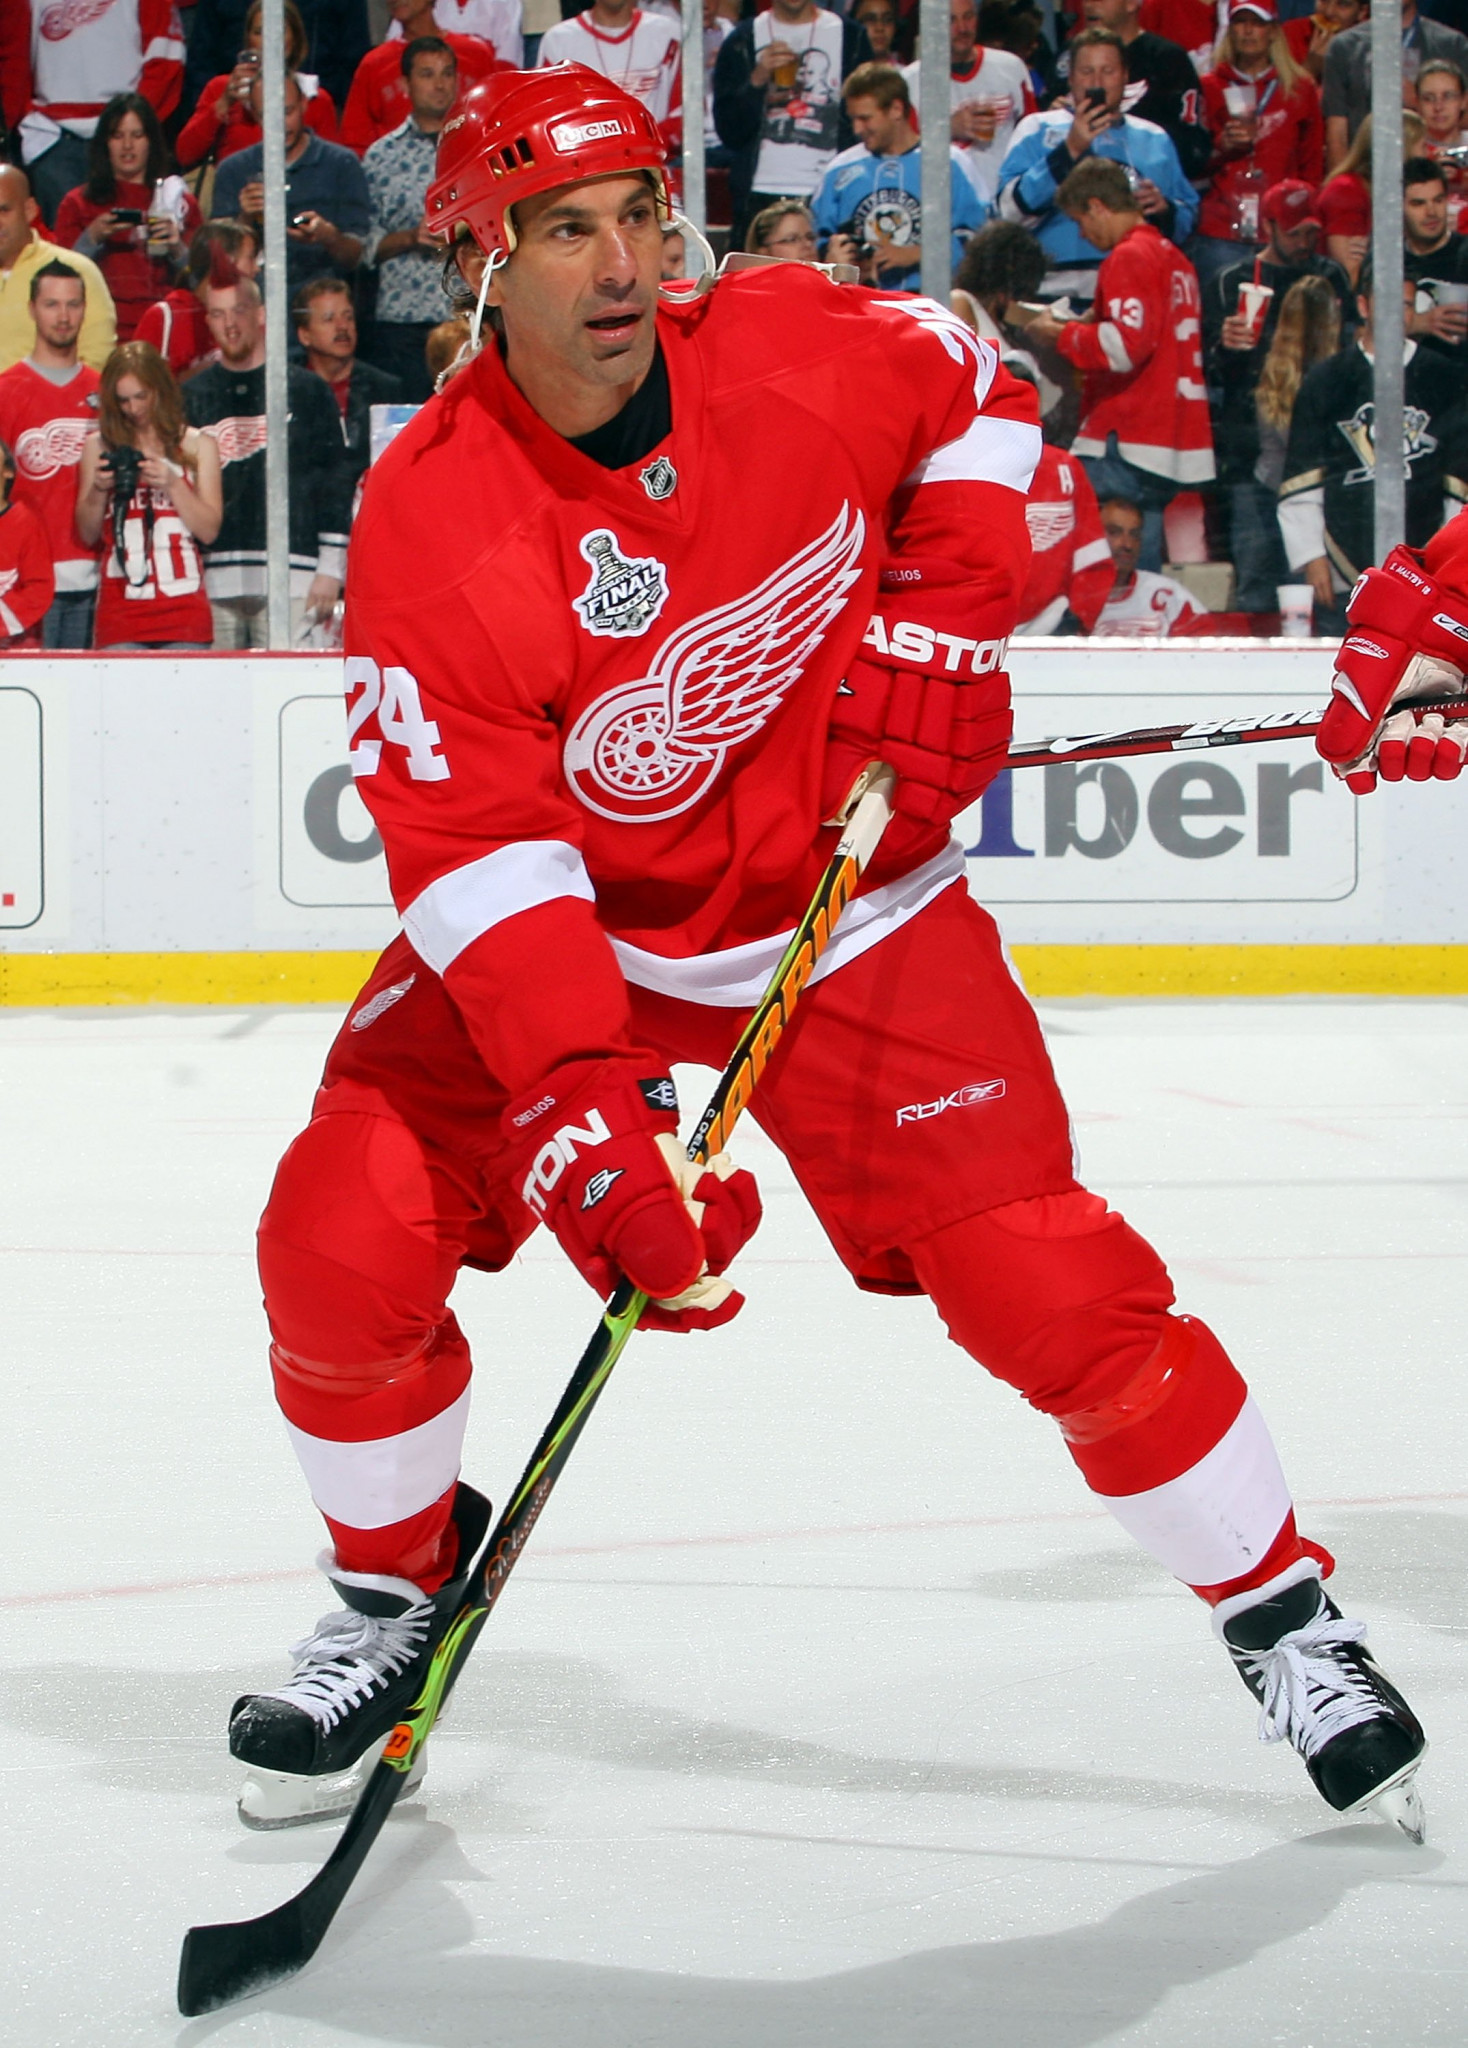 Chris Chelios' career spanned almost 30 years ©Getty Images